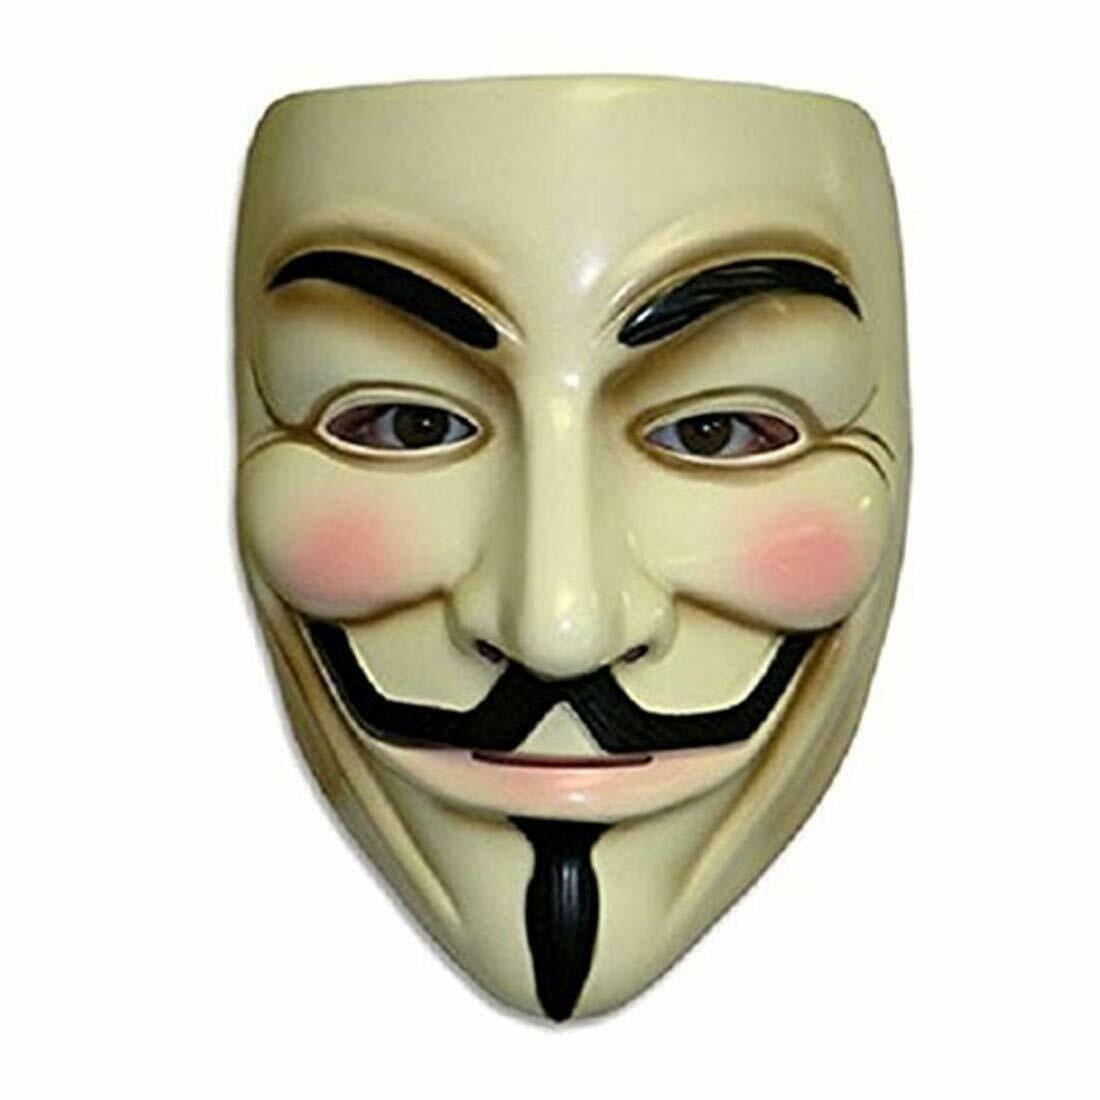 Vendetta Mask Anonymous Guy Fawkes Fancy Dress Halloween Costume Cosplay HT 